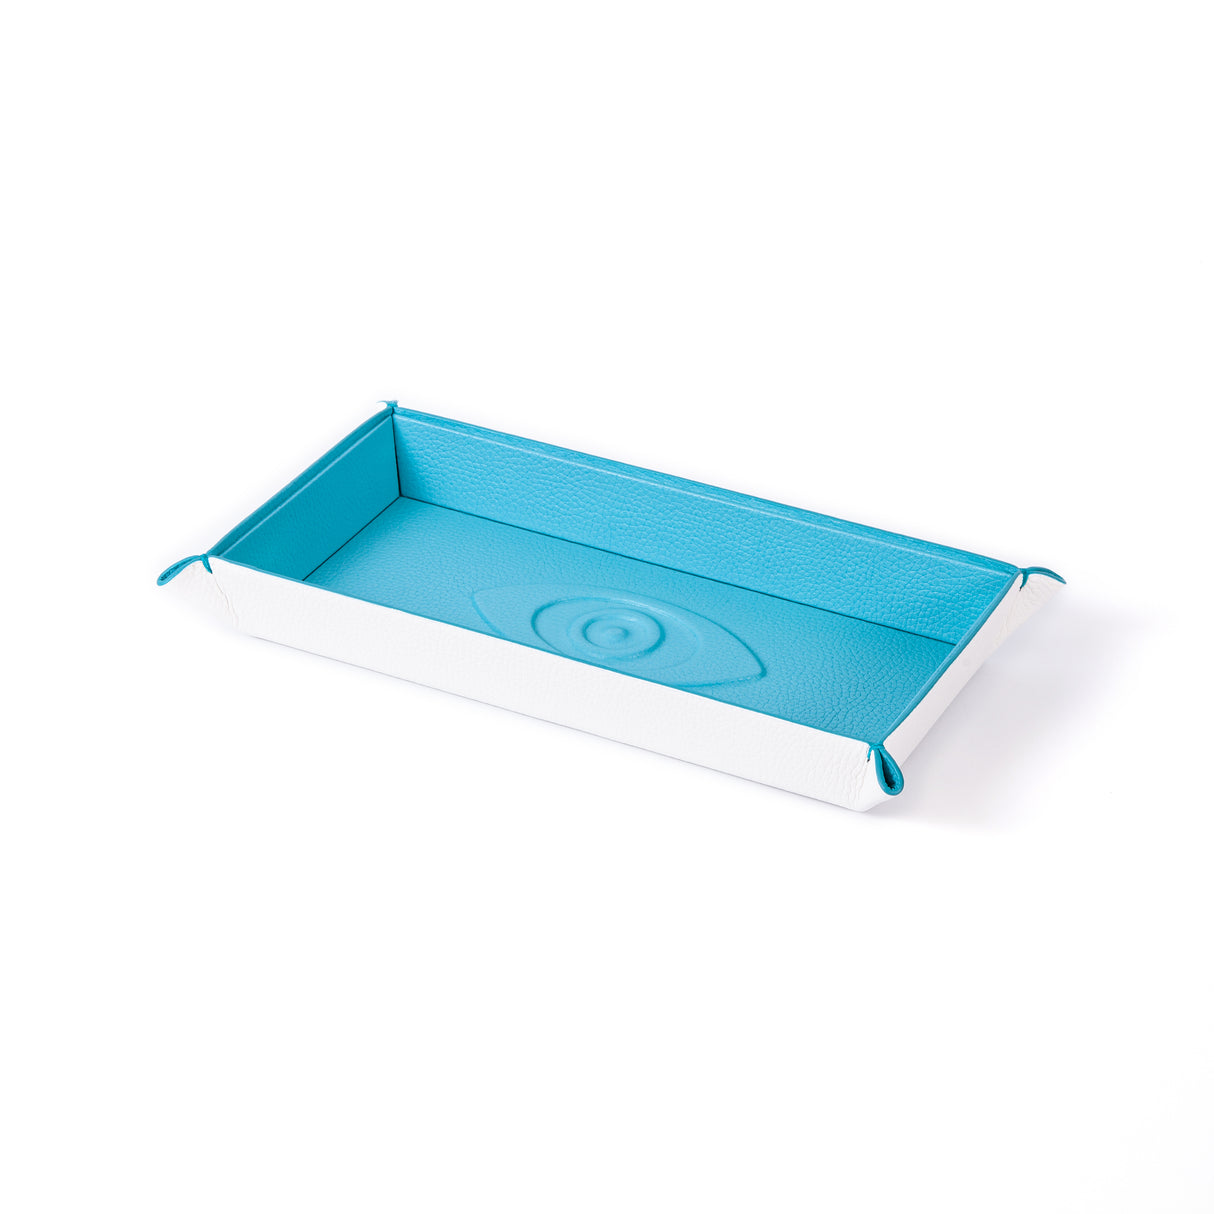 Marine -  Talisman Vide Poche Trays Tidy up your desk or coffee table with our new talisman tray. 100% Leather